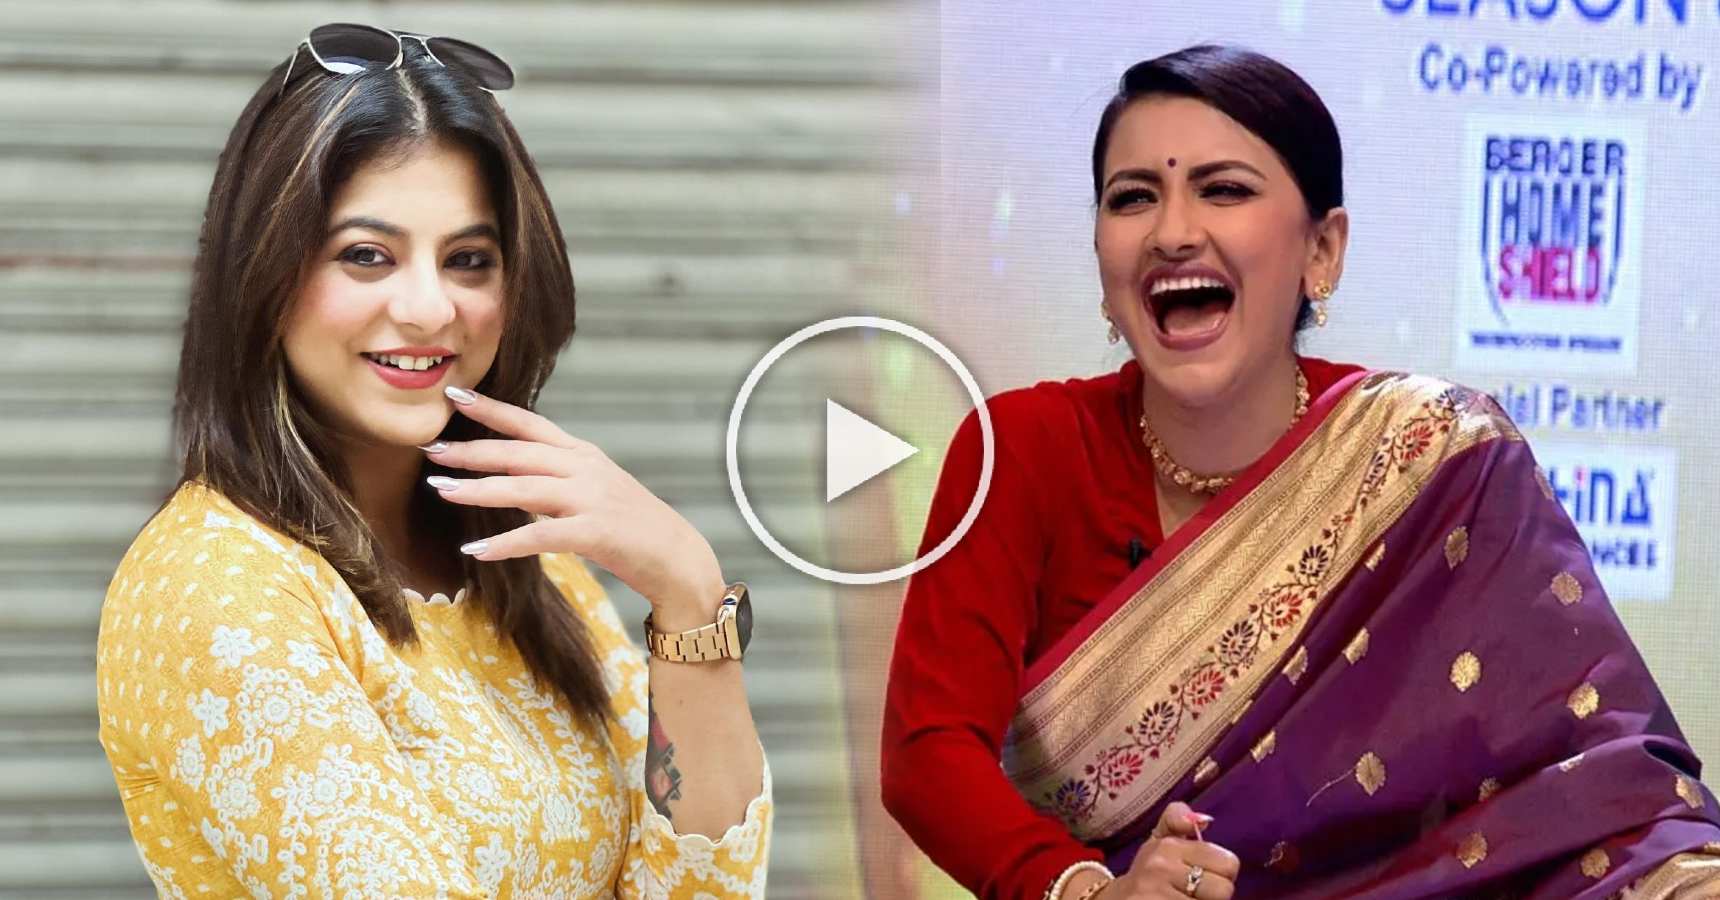 Didi No 1 Alivia Sarkar and her friend share funny incident about their friendship